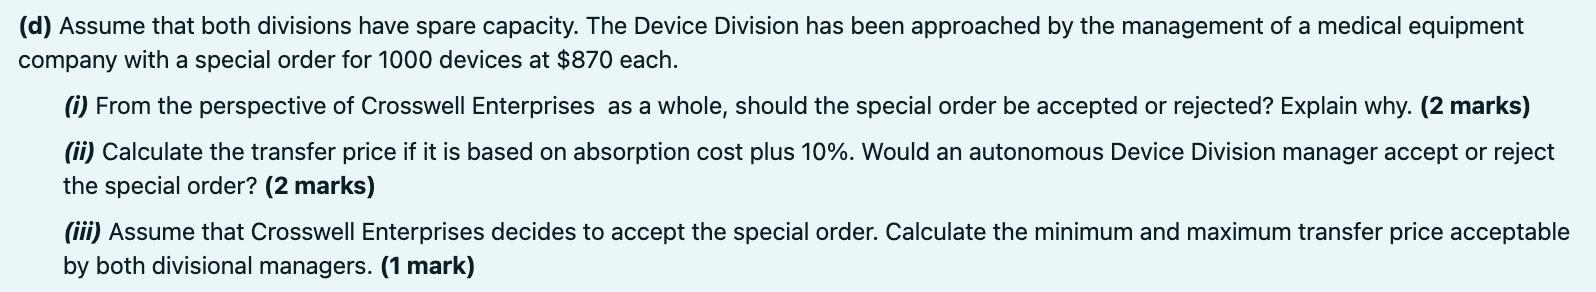 (d) Assume that both divisions have spare capacity. The Device Division has been approached by the management of a medical eq